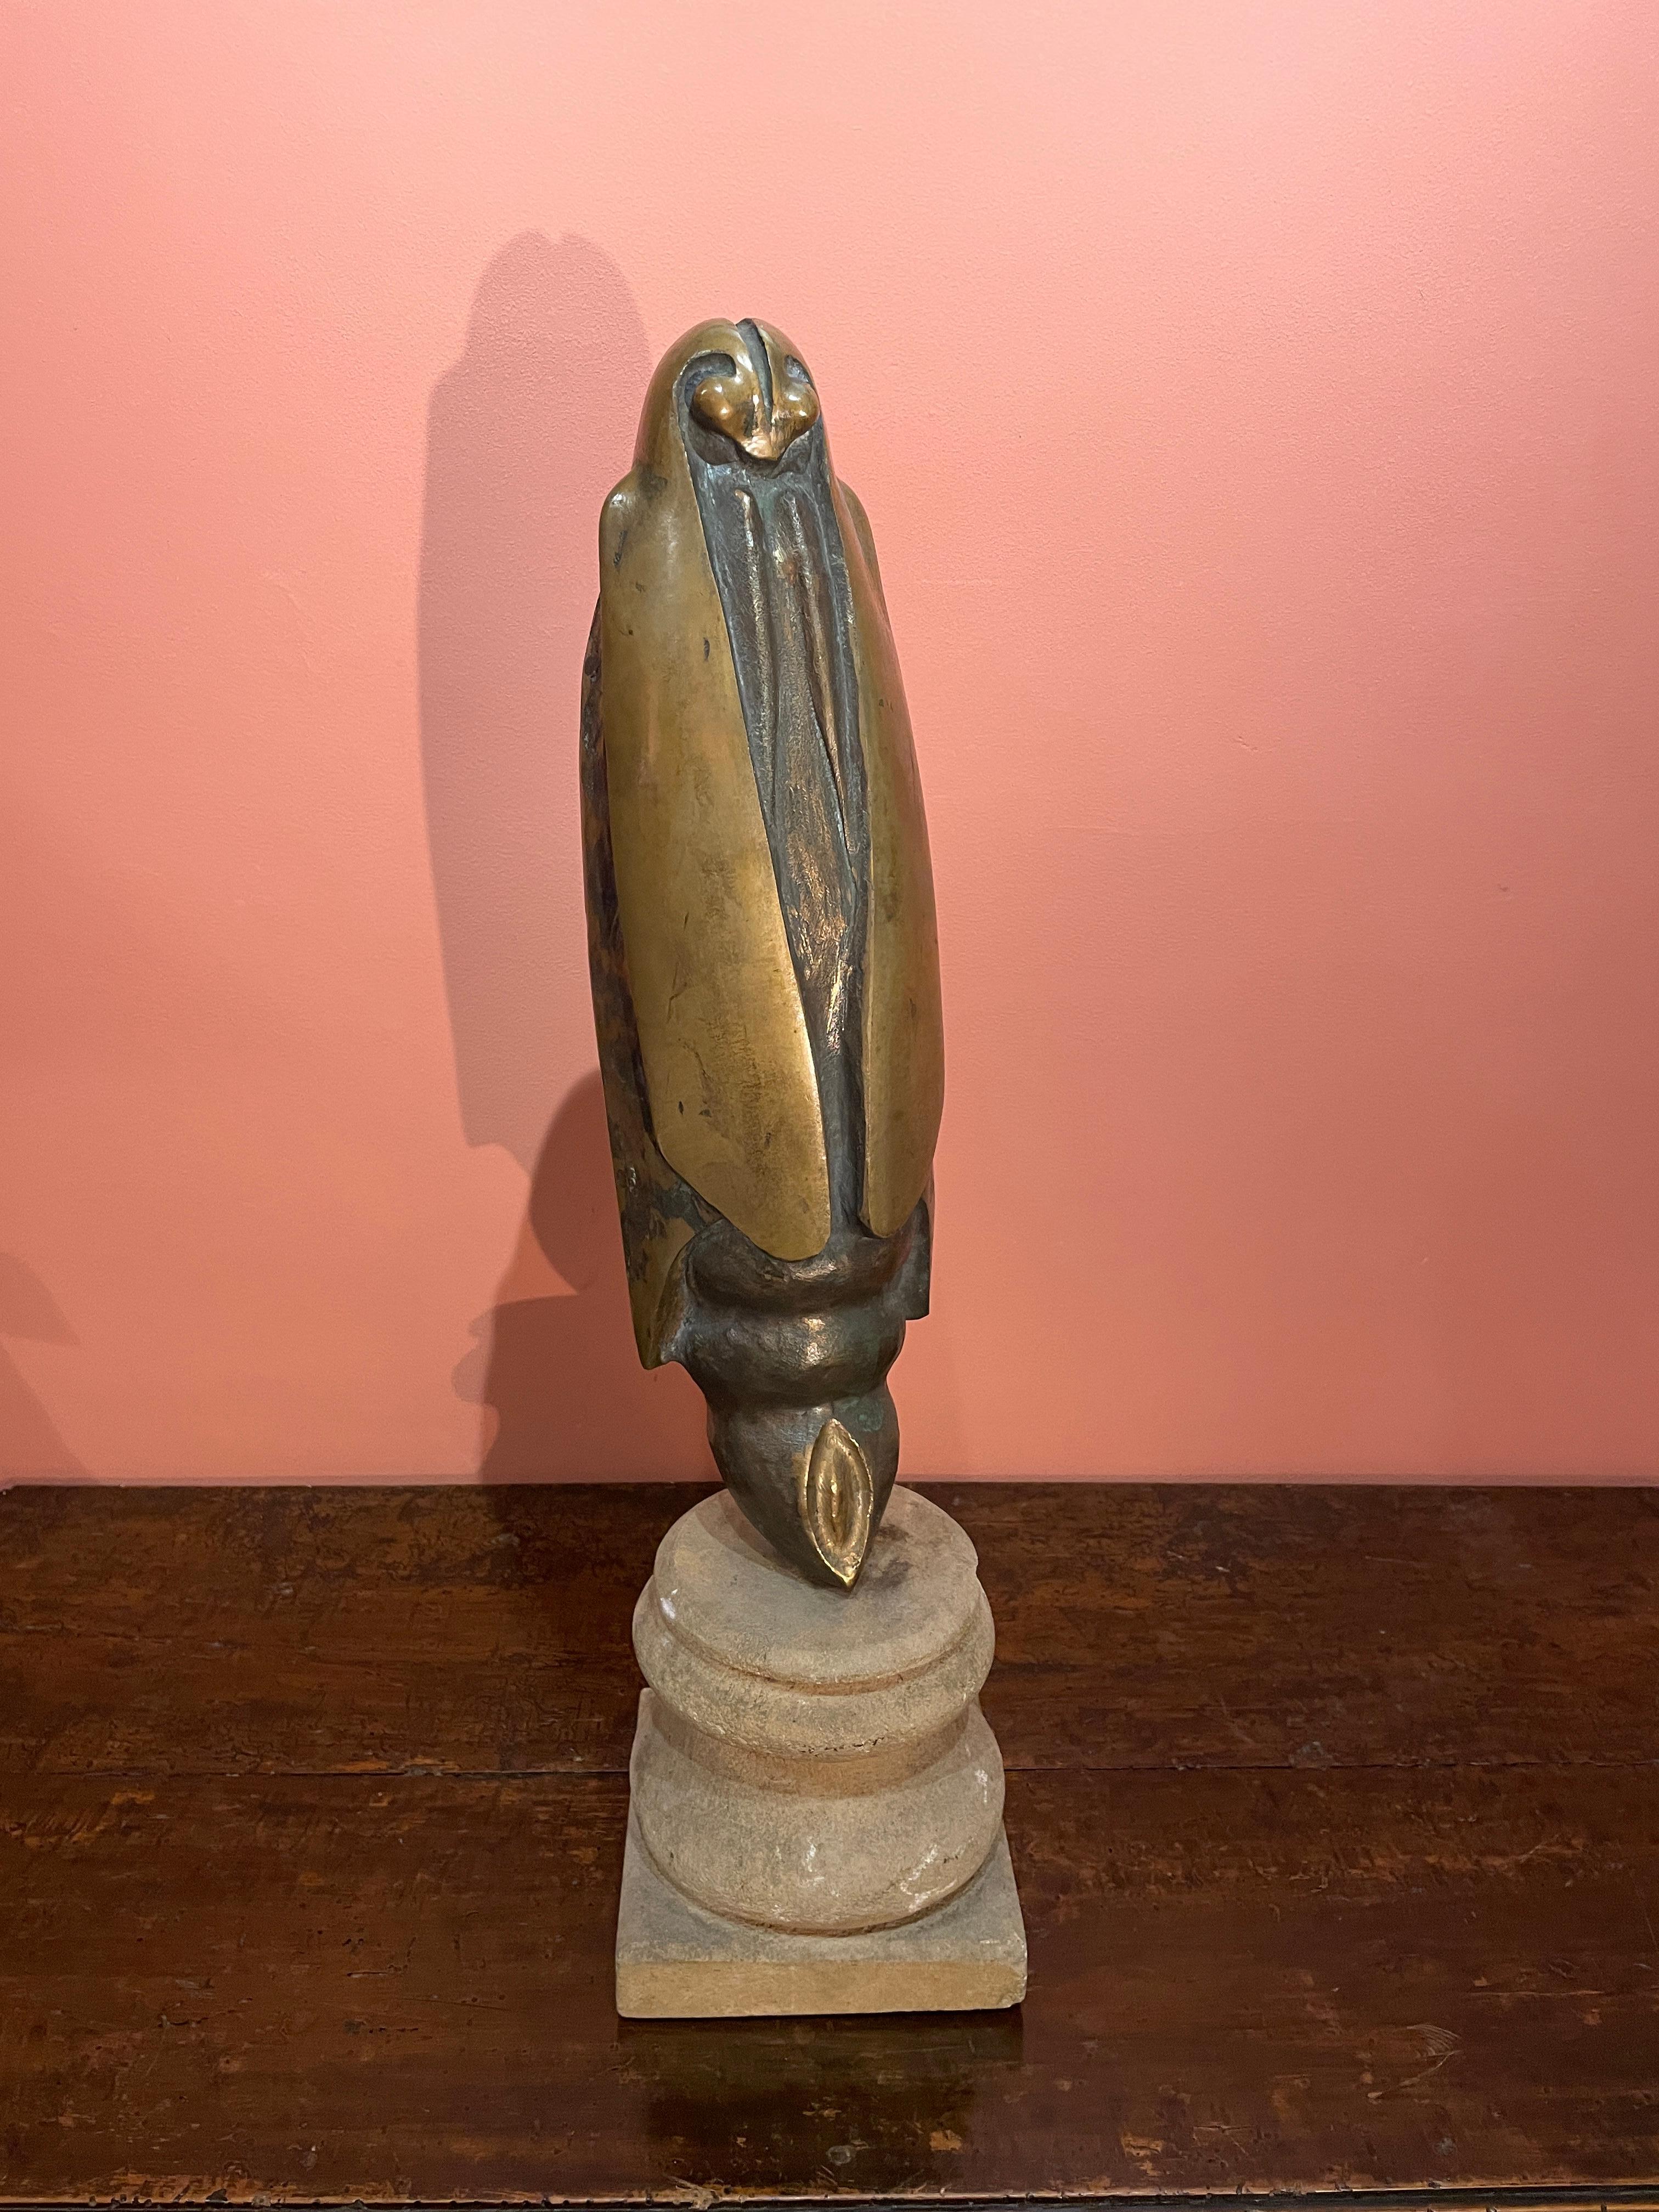 The sculpture is signed at the back but unidentified yet.
Measures: Bronze sculpture
Height 43 cm, length 13 cm, depth 13 cm

Stone base
Height 15 cm, length 15 cm, depth 15 cm.